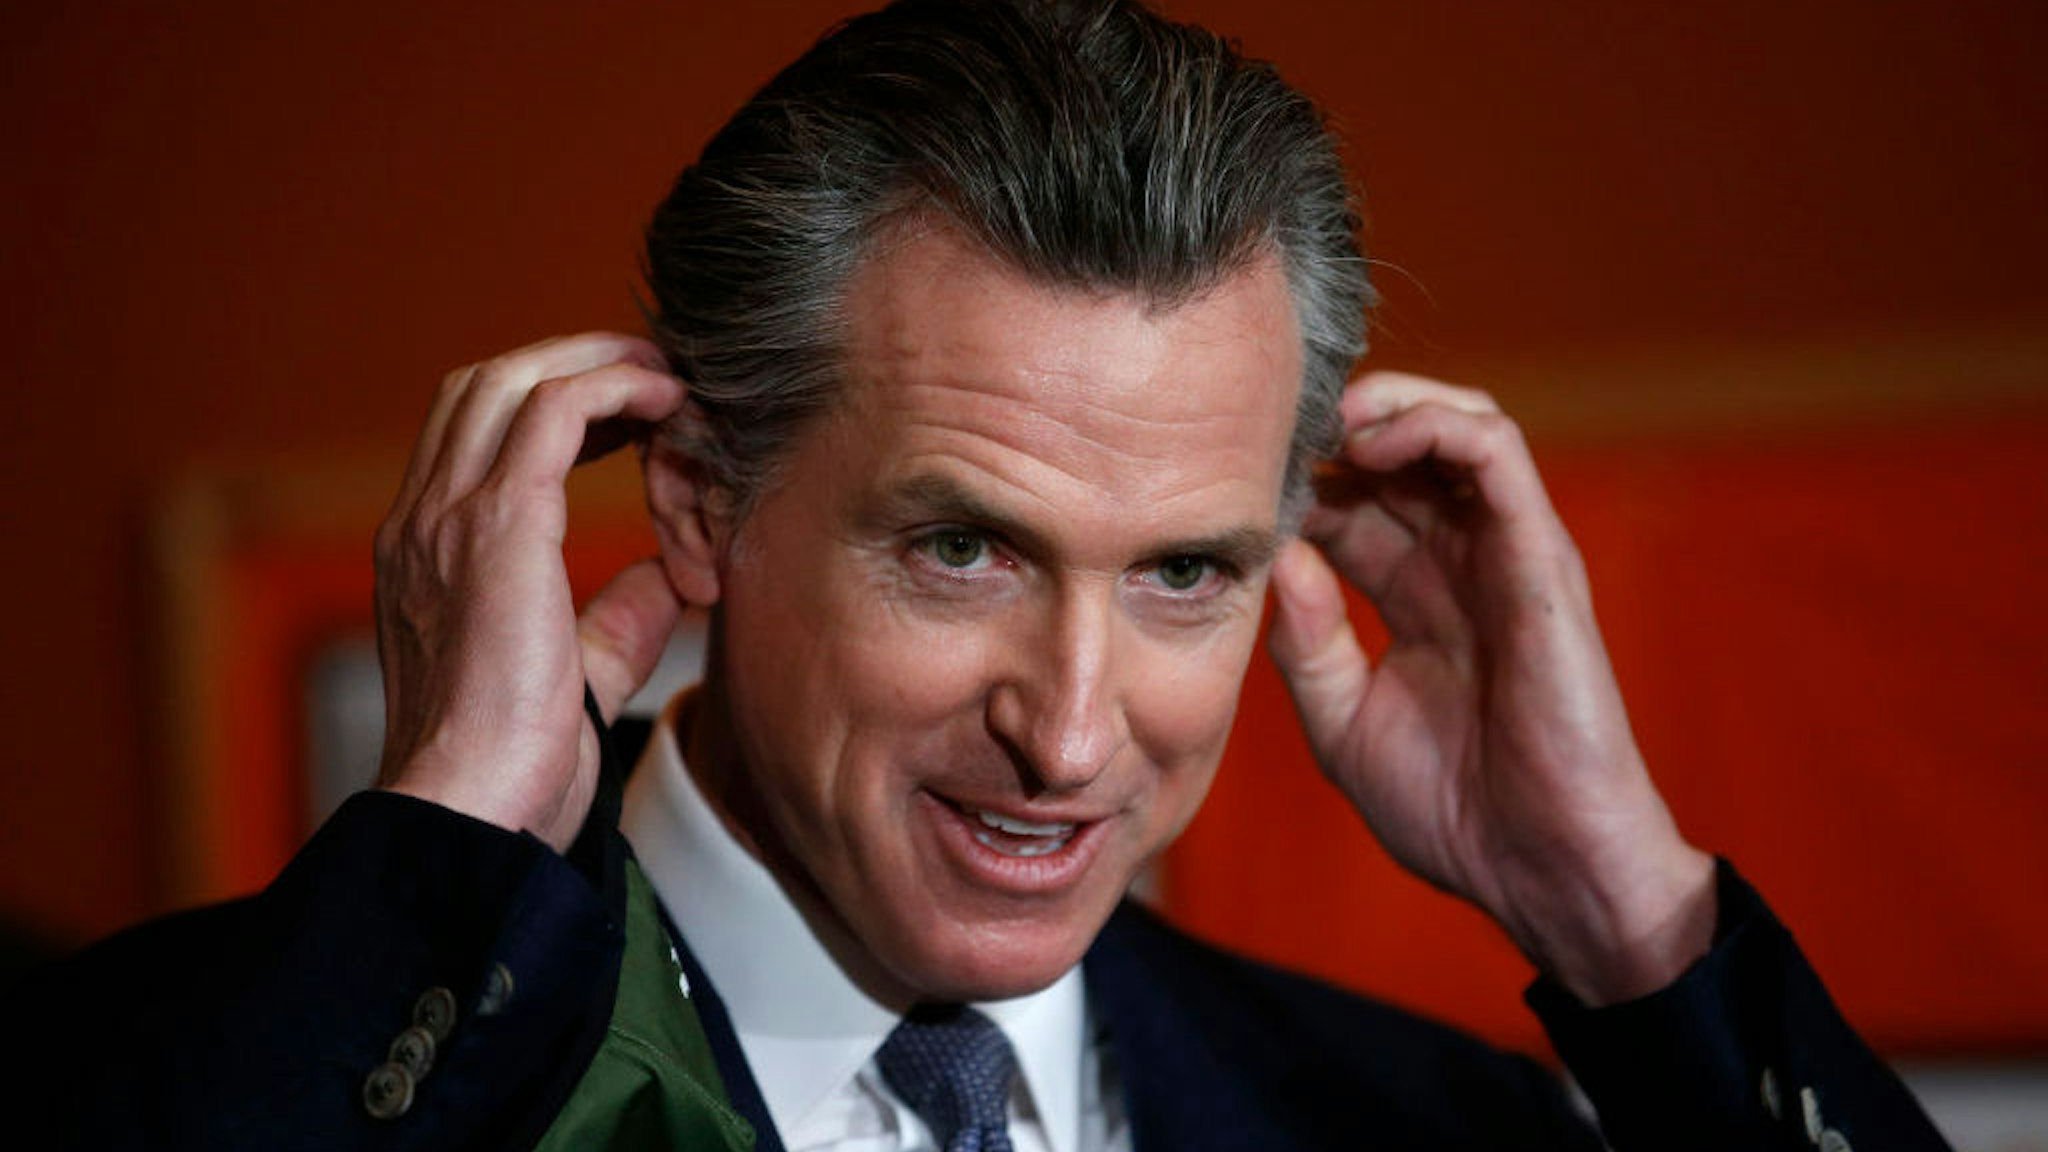 OAKLAND, CALIFORNIA - DECEMBER 22: Gov. Gavin Newsom removes his mask before speaking during a press conference at at the Native American Health Center in Oakland, Calif., on Wednesday, Dec. 22, 2021. (Jane Tyska/Digital First Media/East Bay Times via Getty Images)